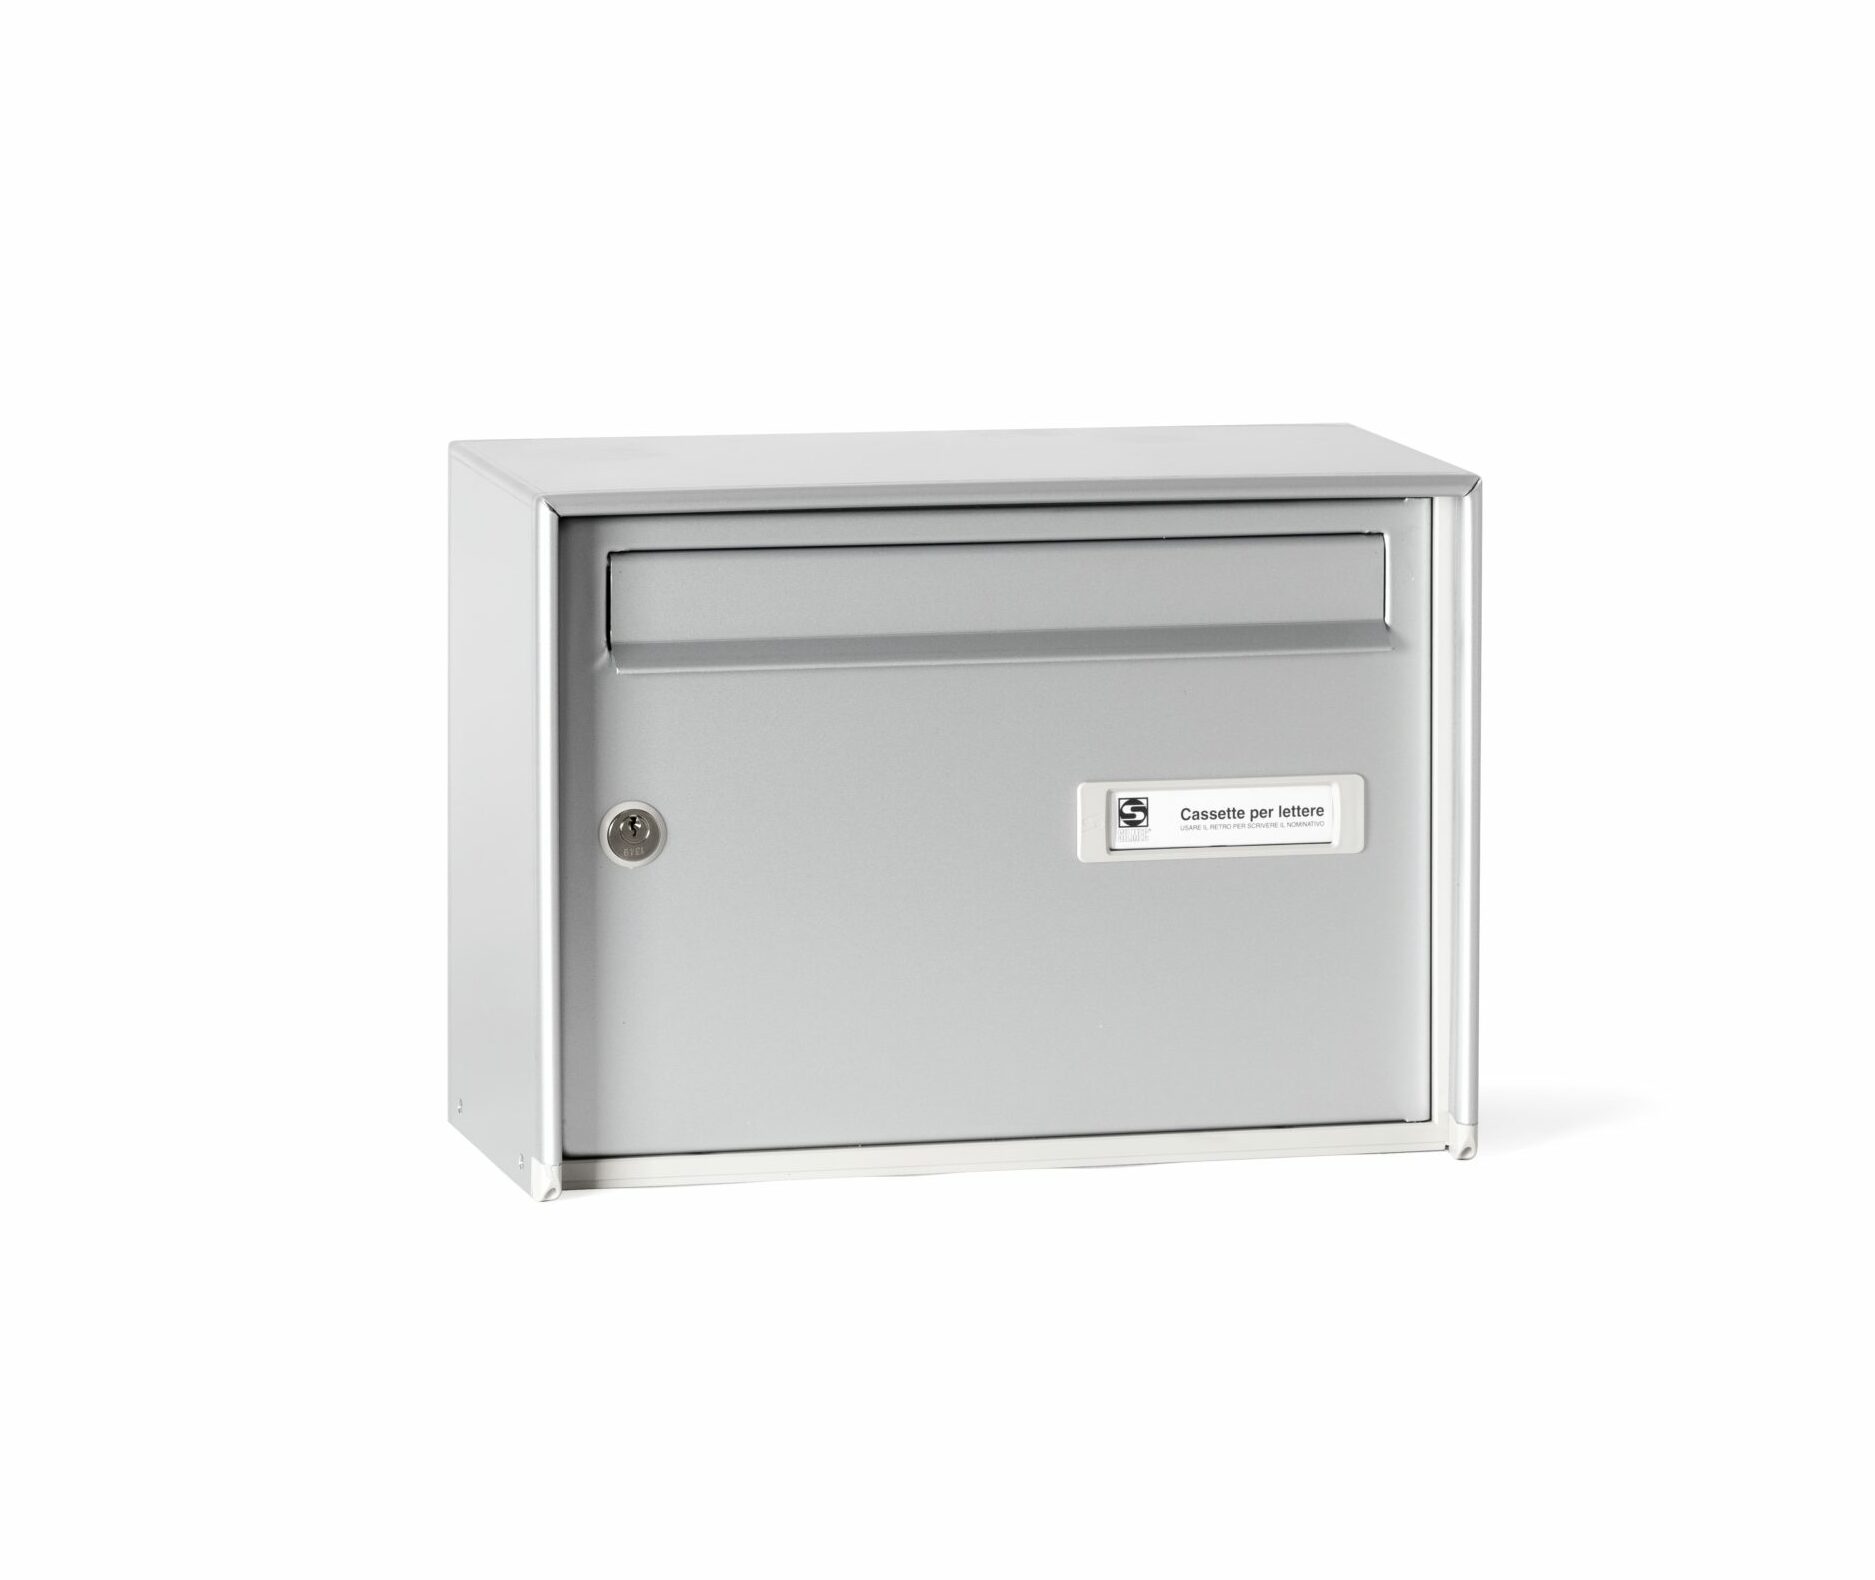 S522 Open Air letterbox